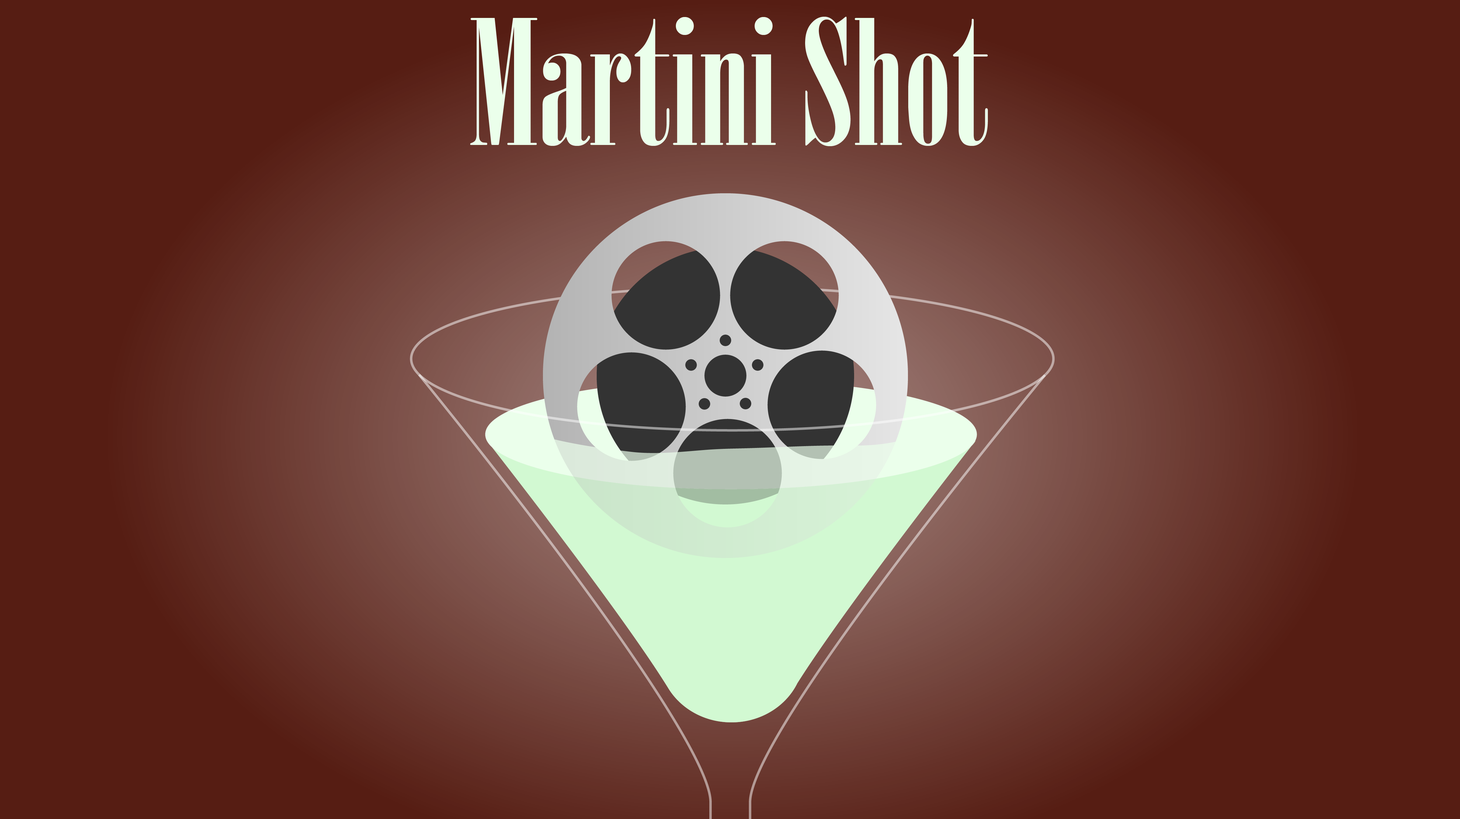 This is Rob Long and on today's Martini Shot I actually do deliver today's Martini Shot. I've been gone for a bit. Please tell me you noticed. You did, right?